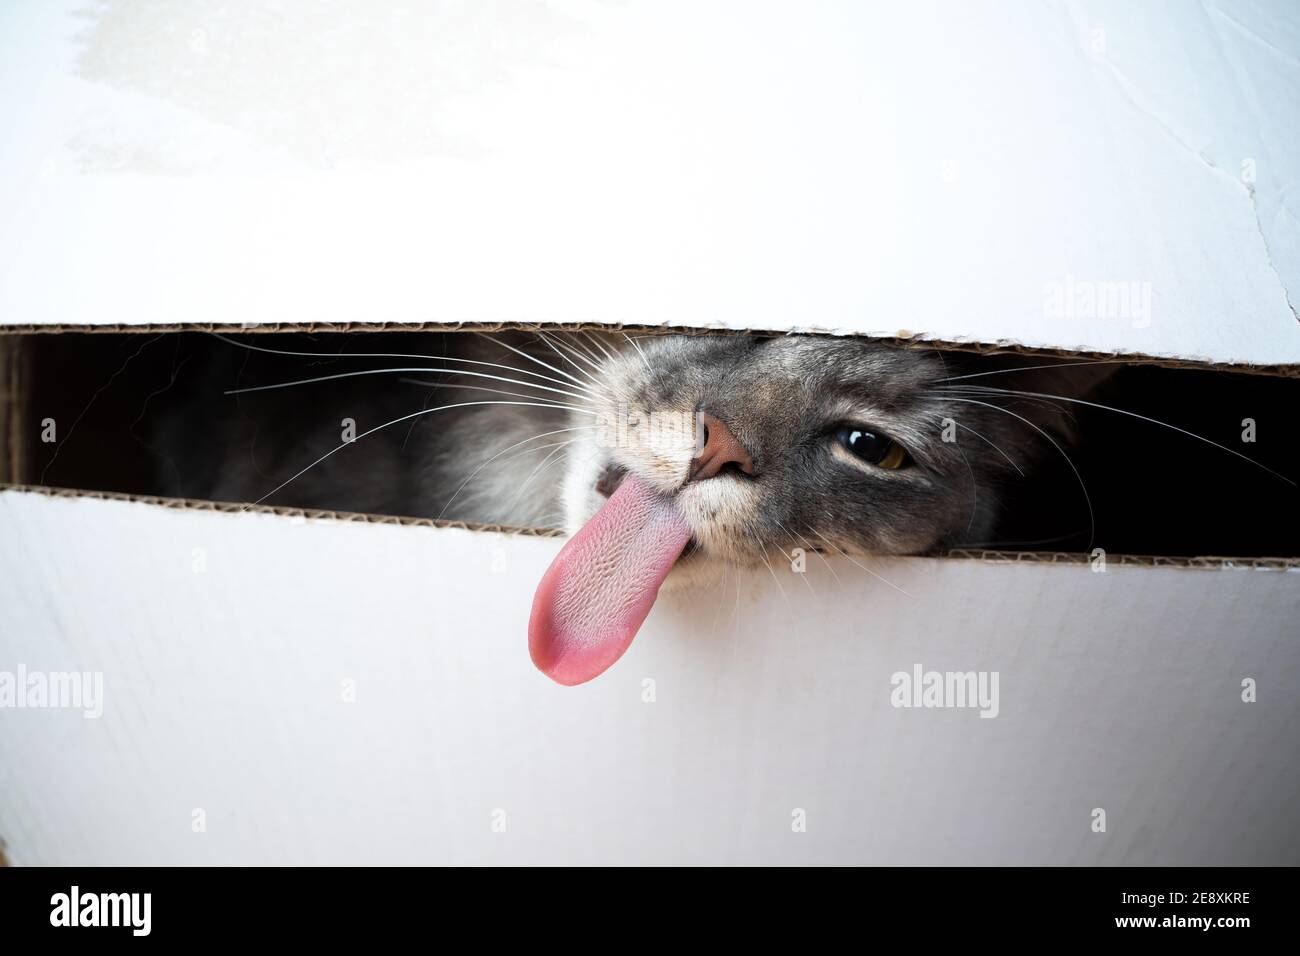 funny picture of a cat sticking out long tongue looking through a gap Stock Photo